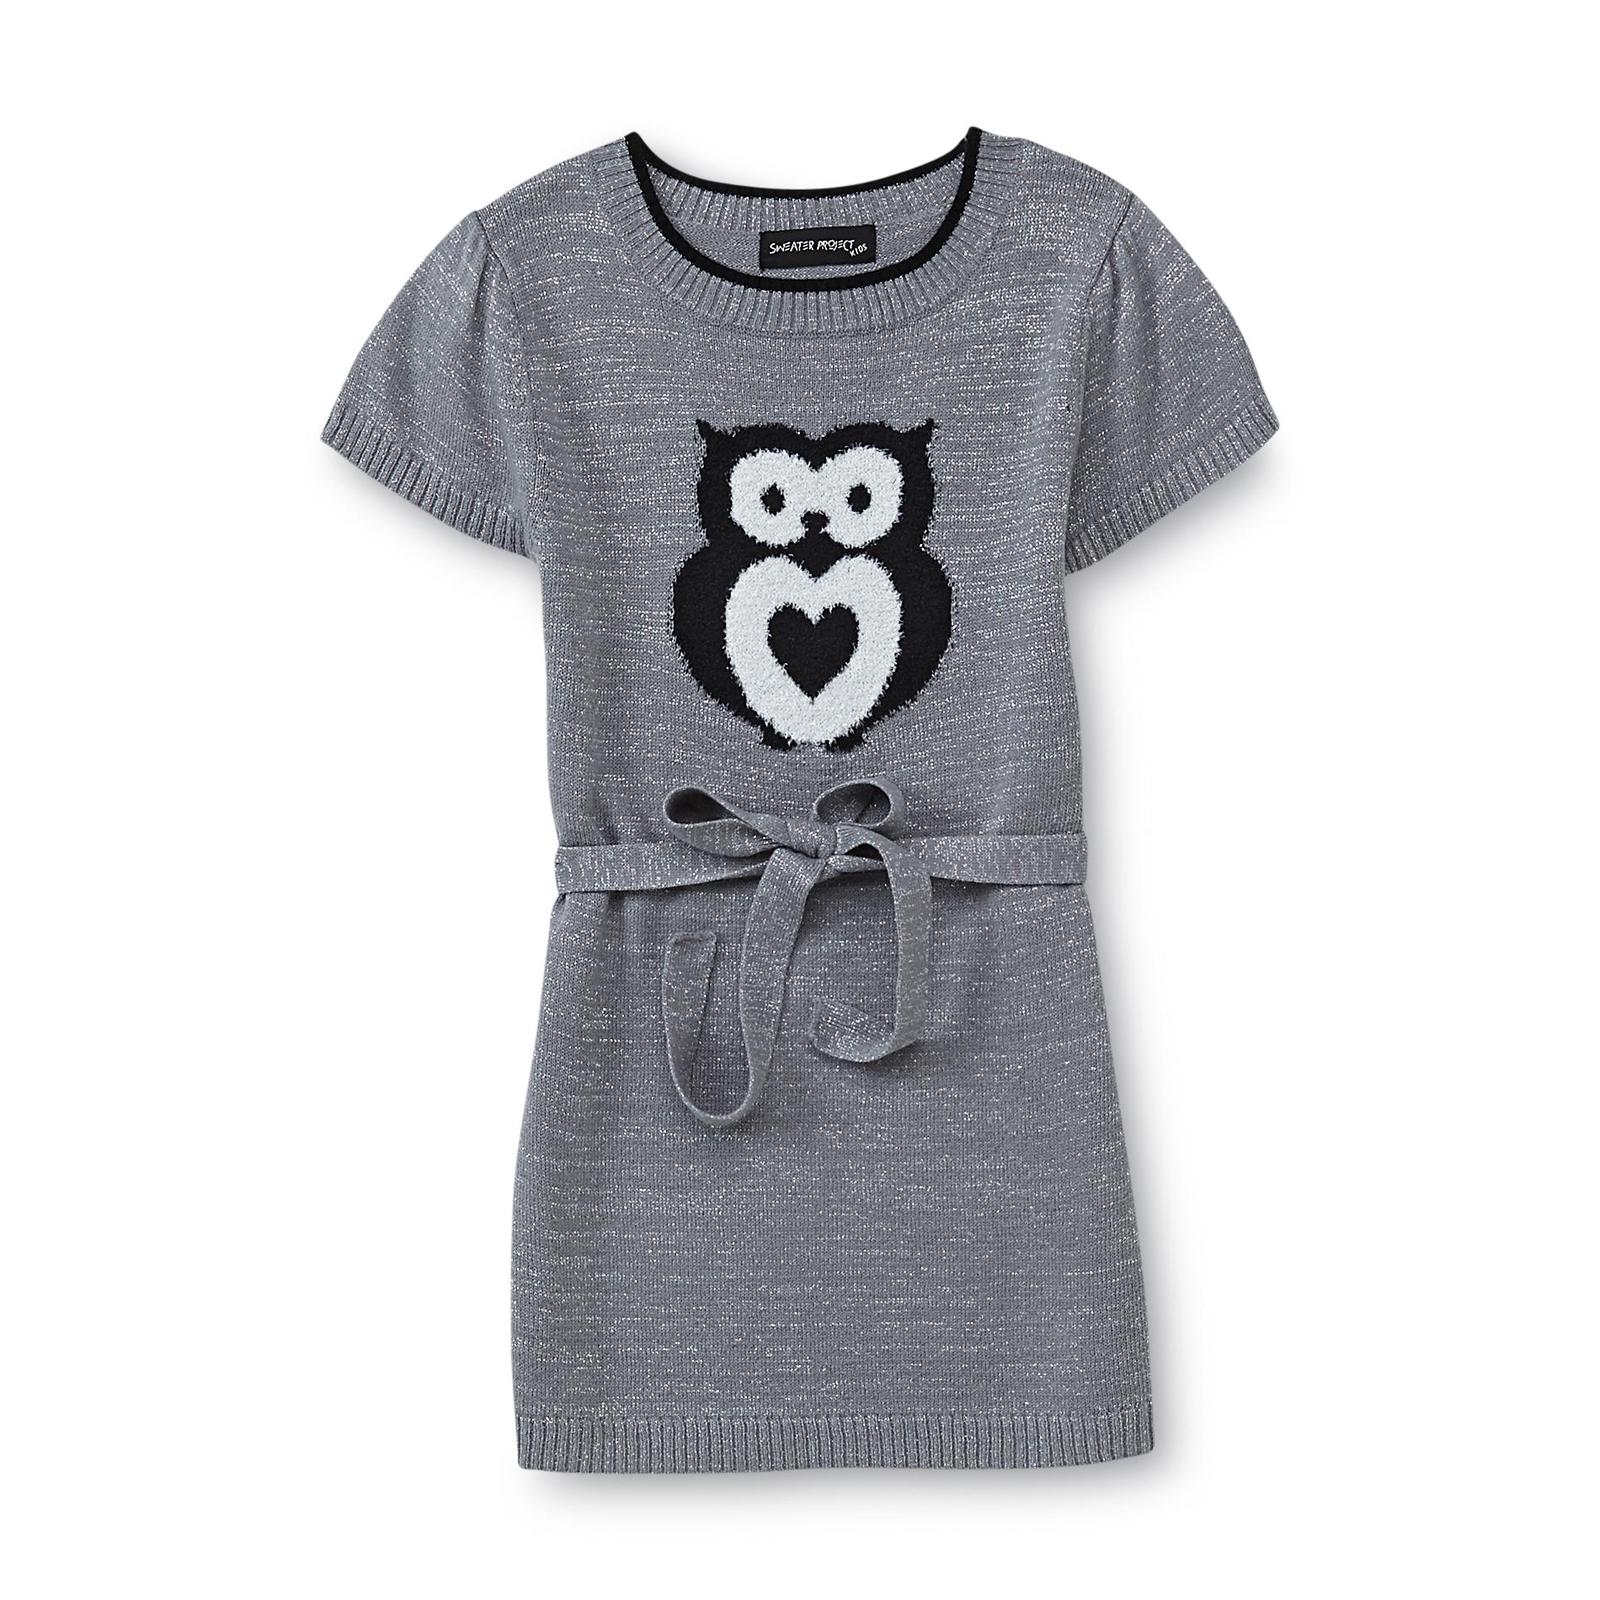 Sweater Project Girl's Belted Sparkle Tunic Sweater - Owl